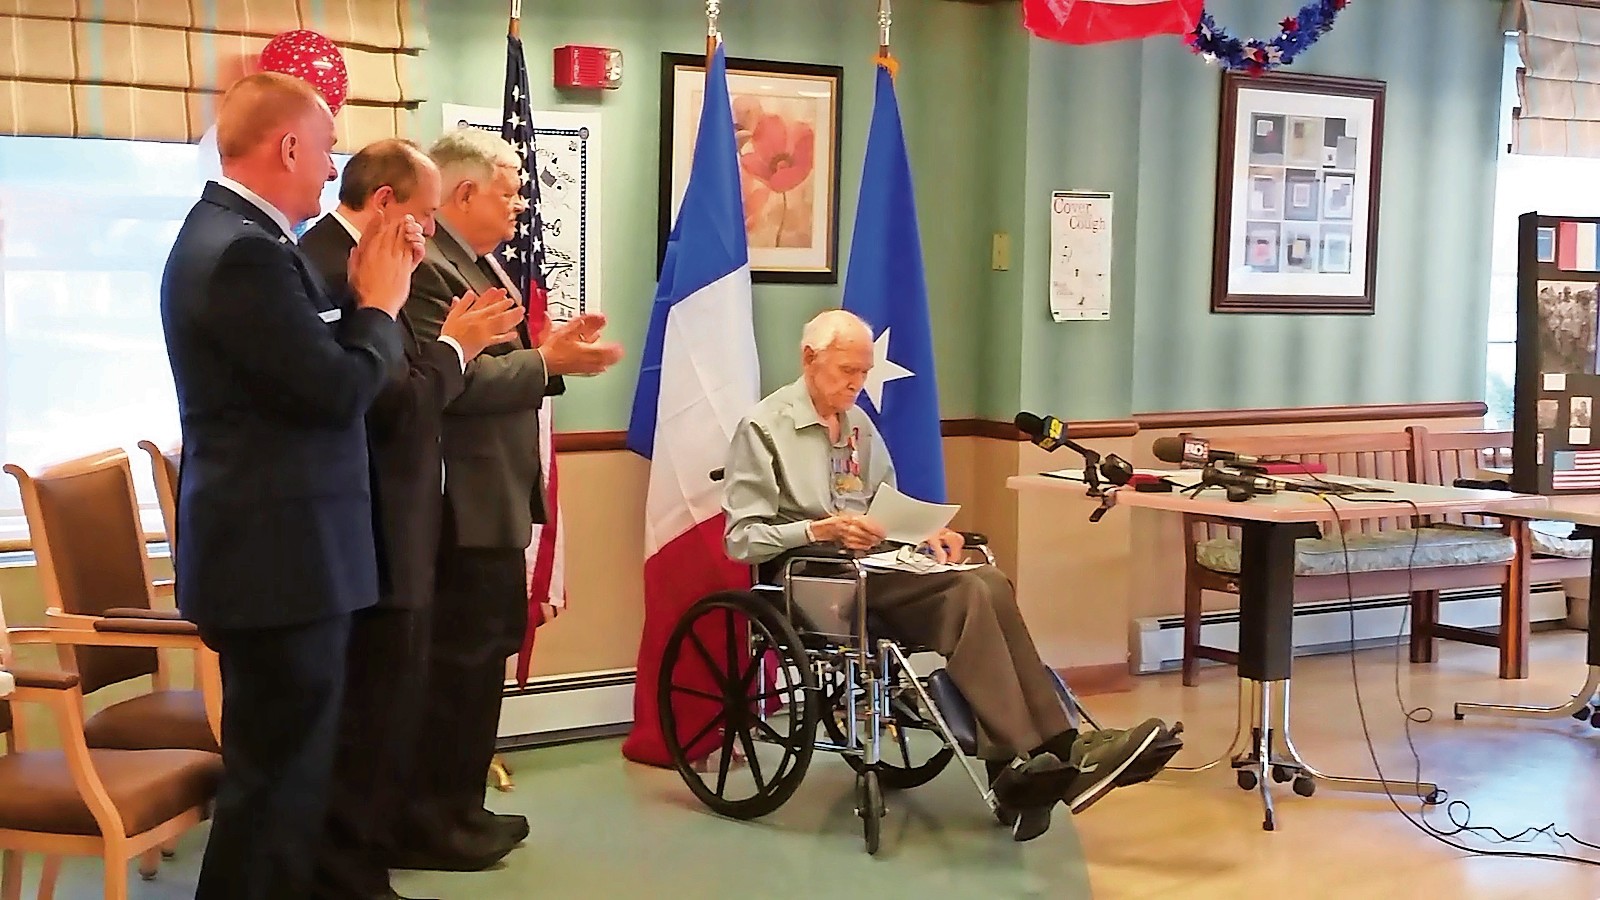 From left, General Thomas Owens, Colonel Frédéric Vigneron, and Bruce Smith applauded Captain Harold Smith during his acceptance speech.